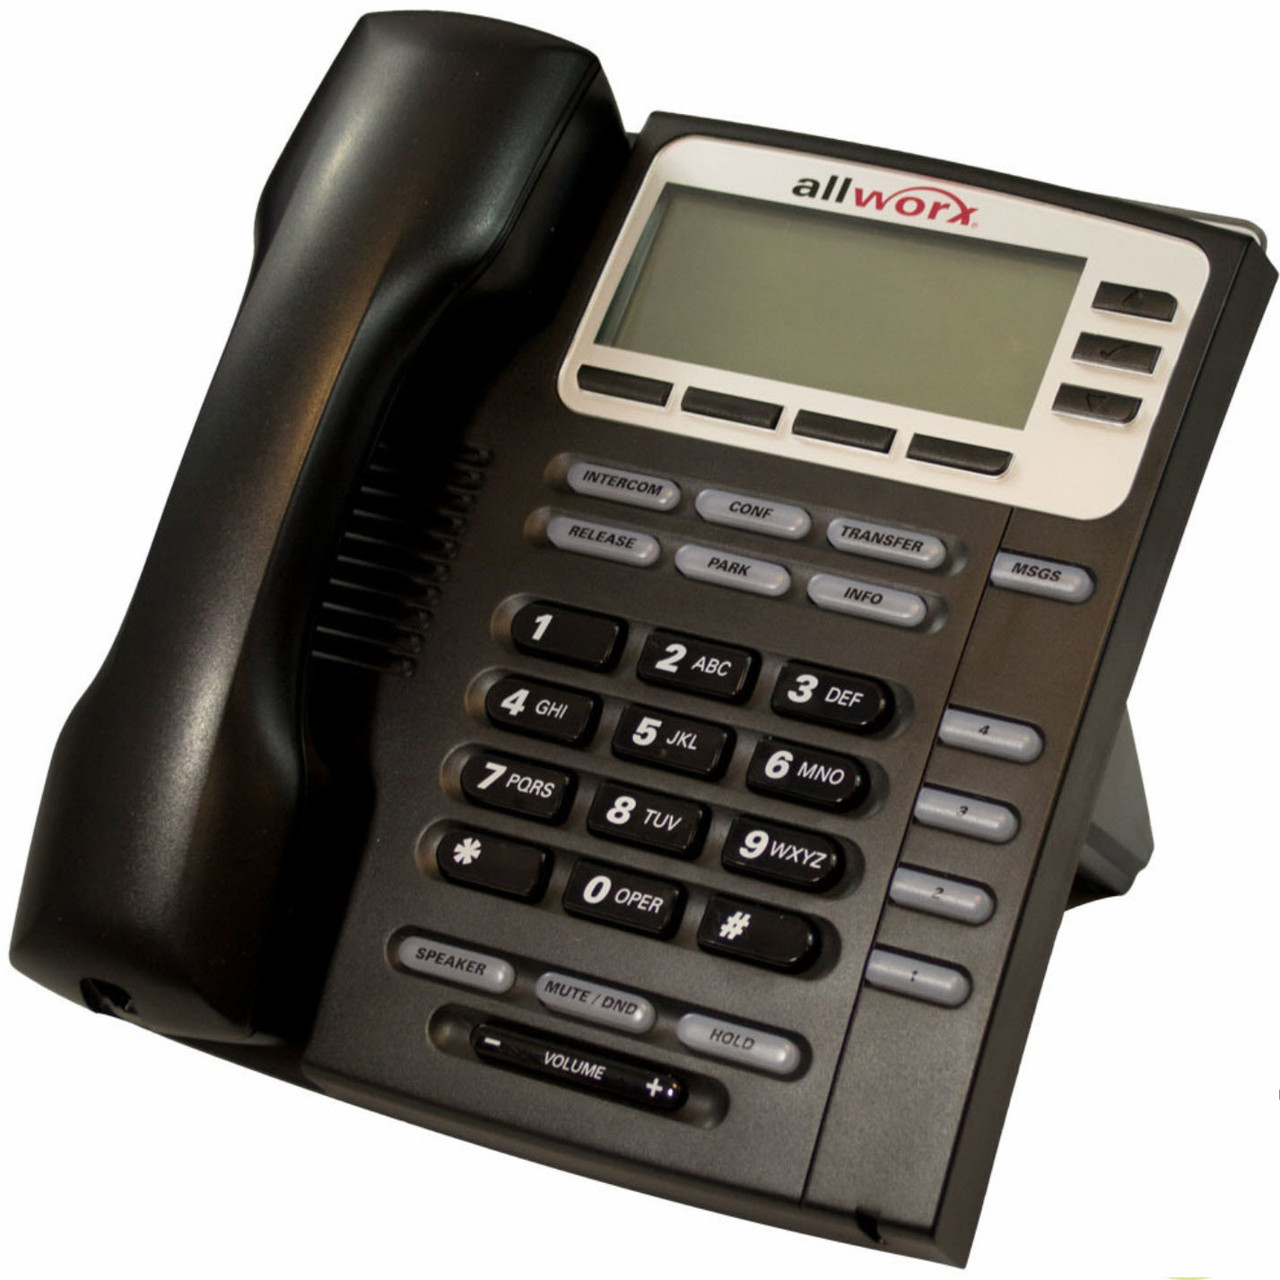 Allworx 9212 VoIP IP Poe Business Phone for sale online 